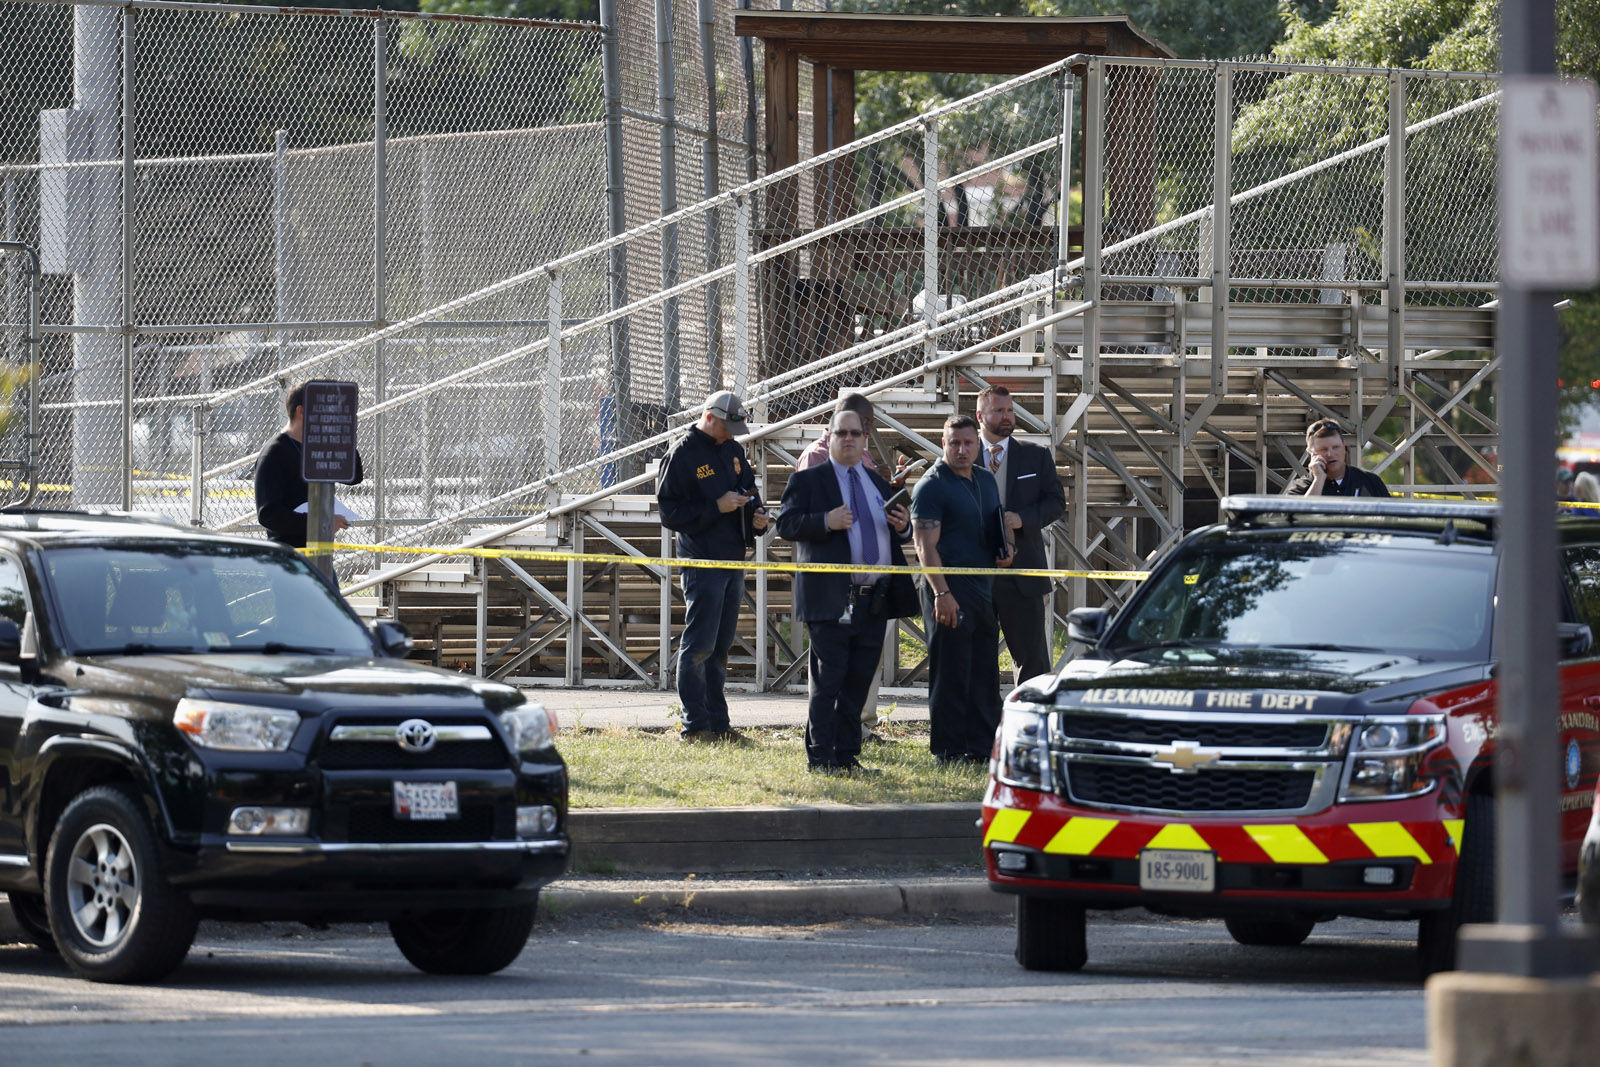 Law enforcement officers investigate the scene of a shooting near a baseball field in Alexandria, Va., Wednesday, June 14, 2017, where House Majority Whip Steve Scalise of La. was shot at a Congressional baseball practice. (AP Photo/Alex Brandon)